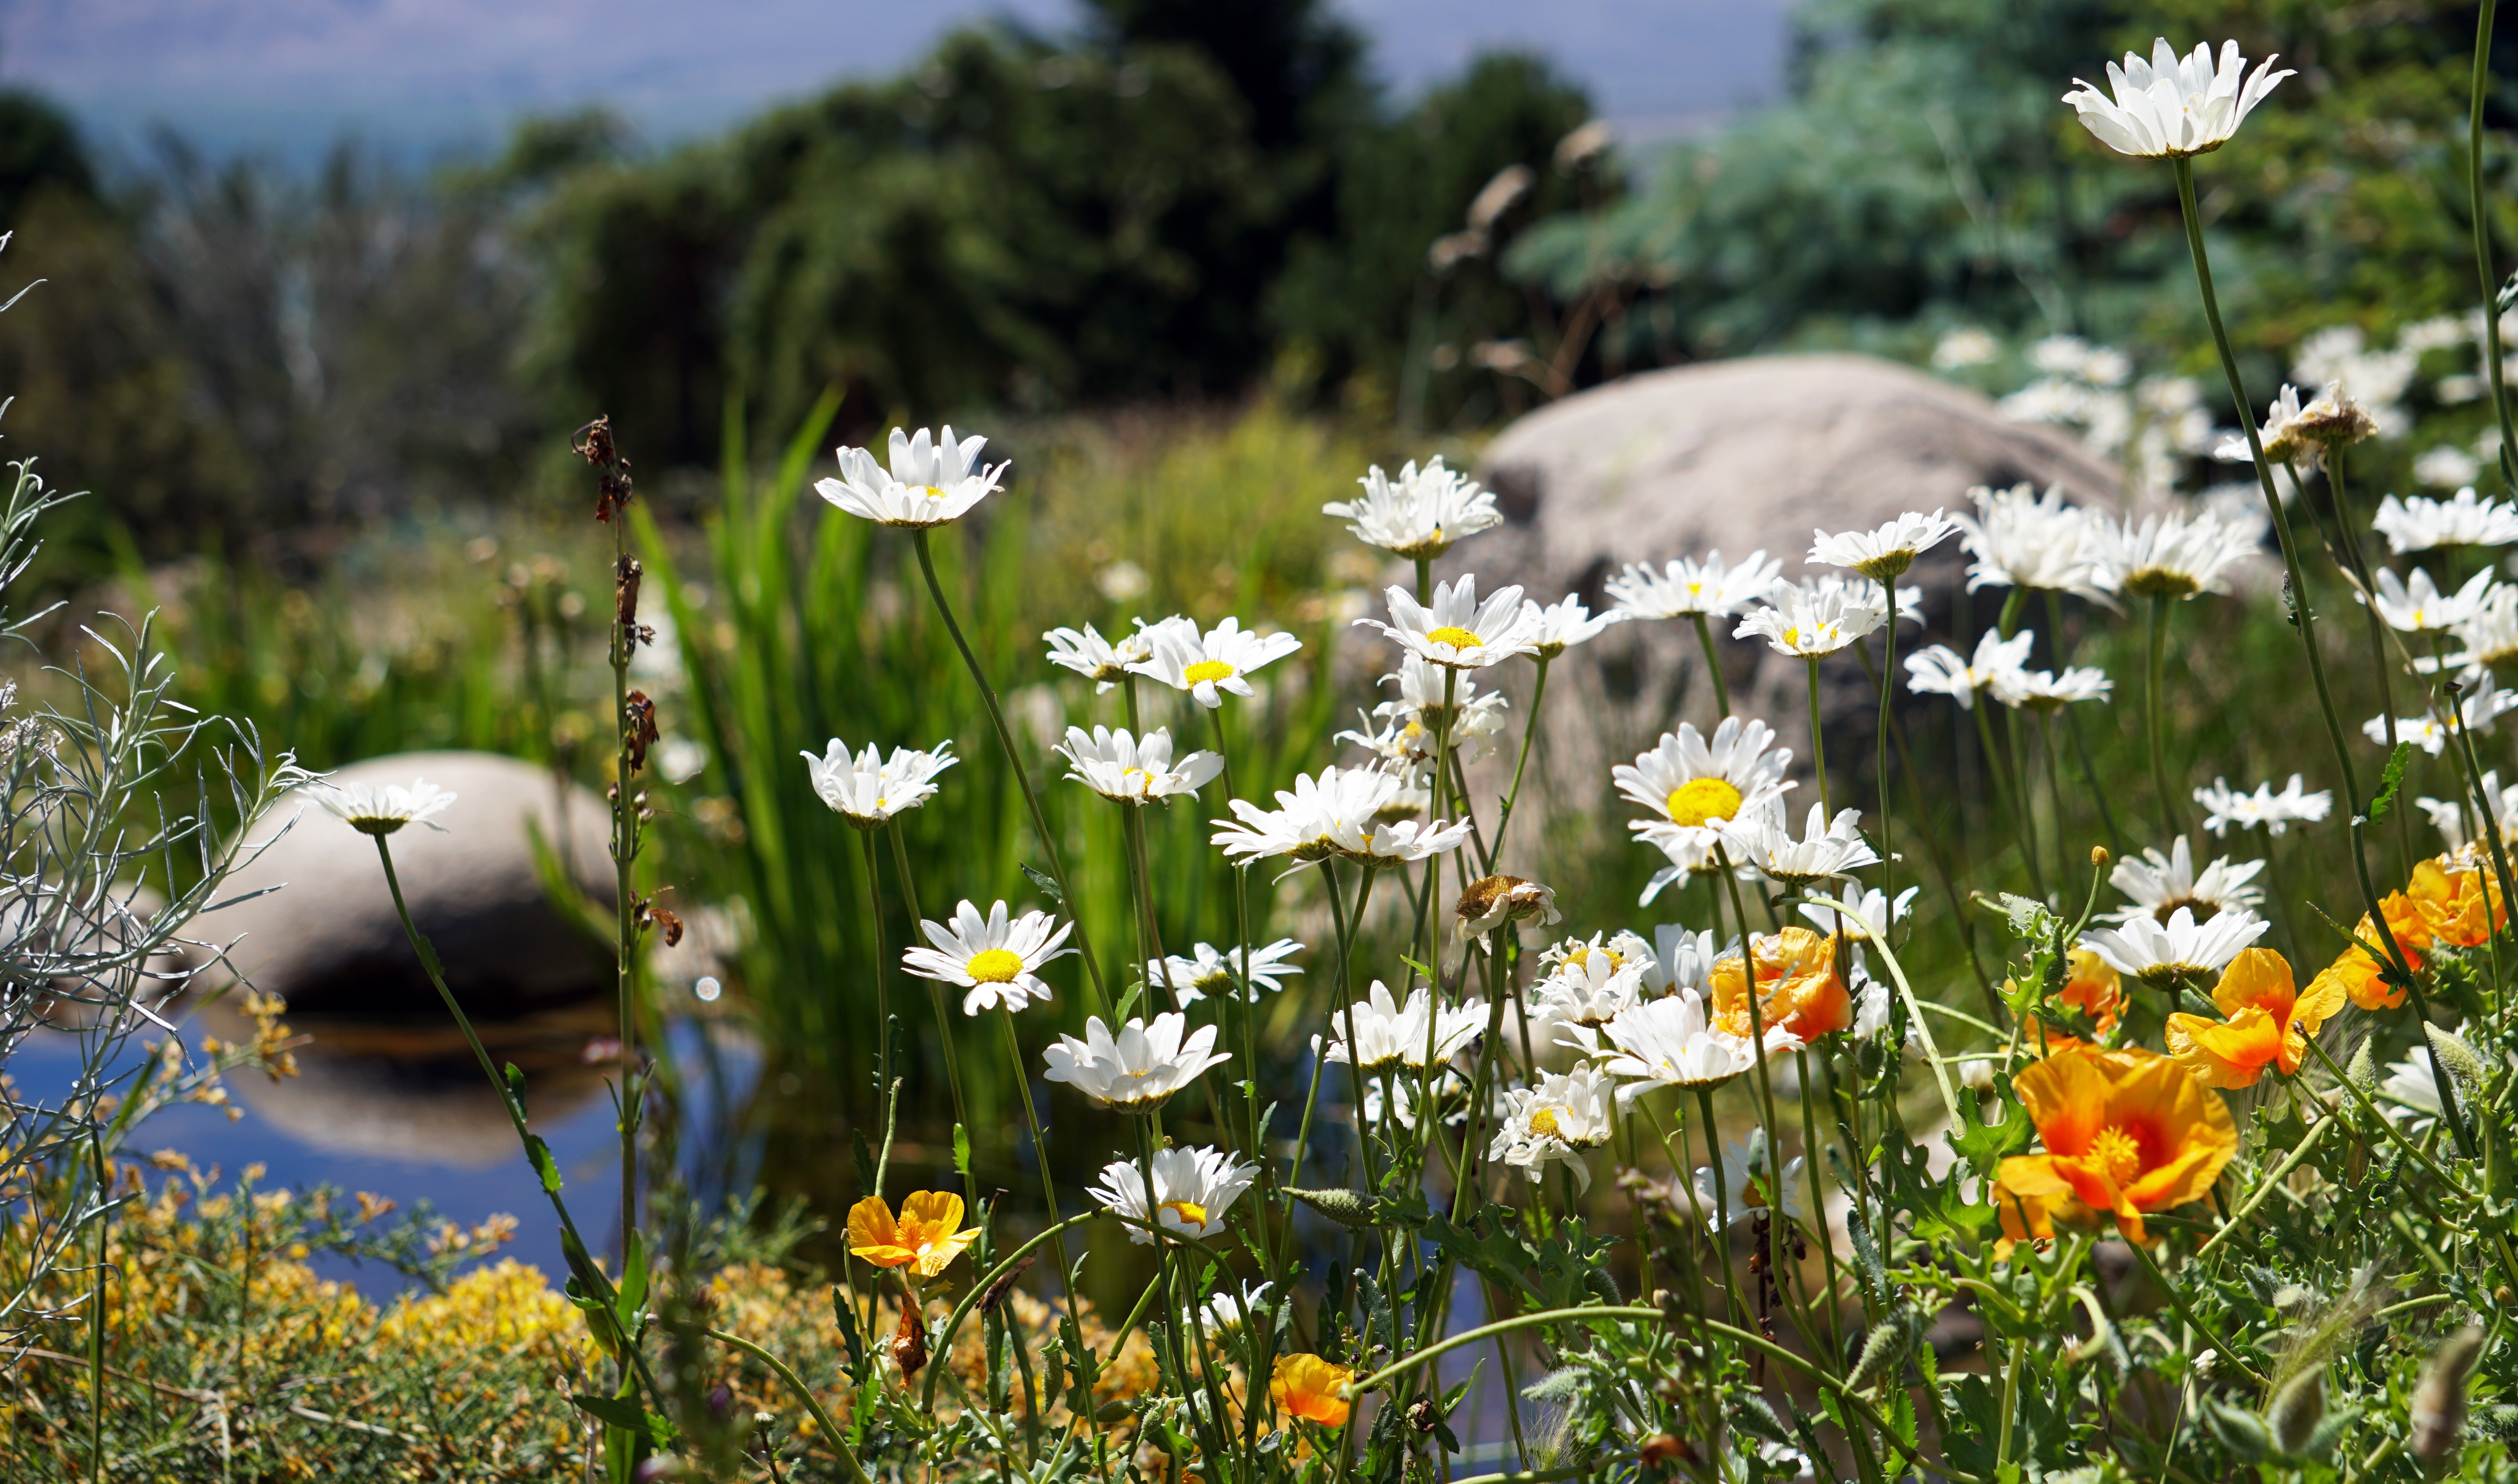 Flowers and pond in the Eastern Sierra